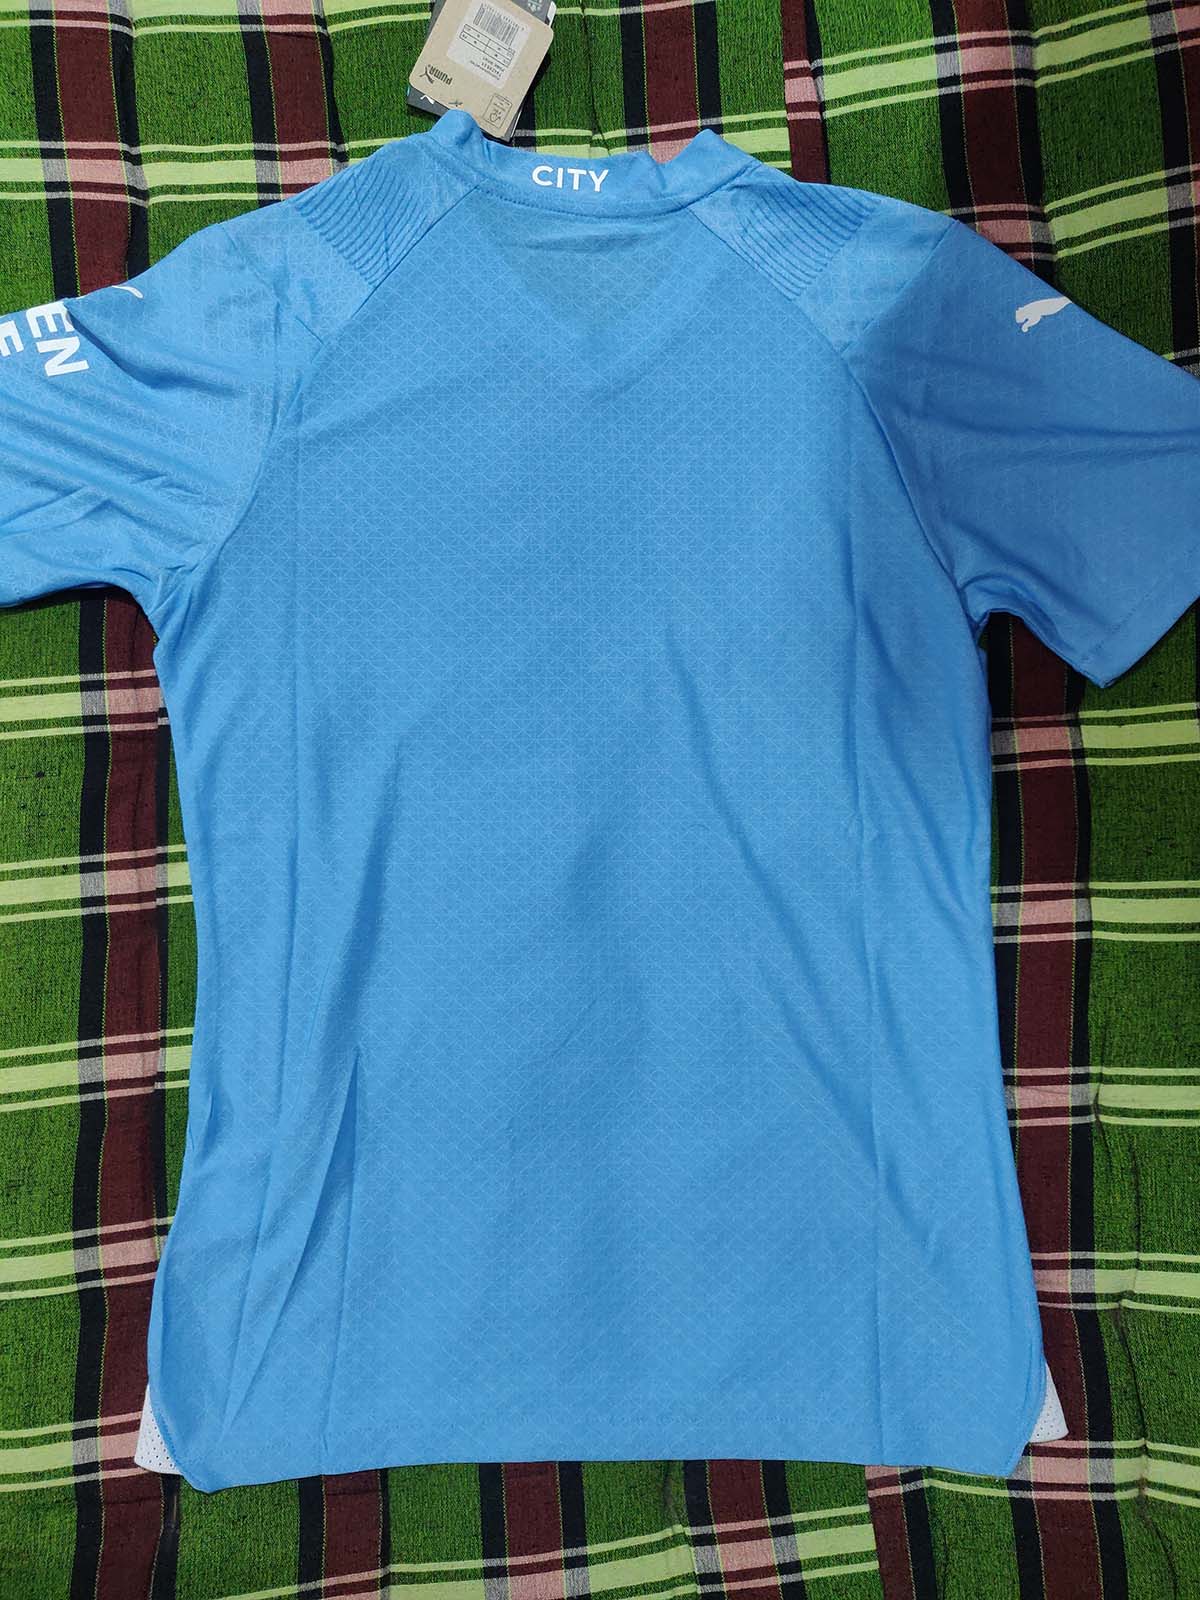 Manchester City Home Kit 23/24 Best Price in BD - Jersey Club BD